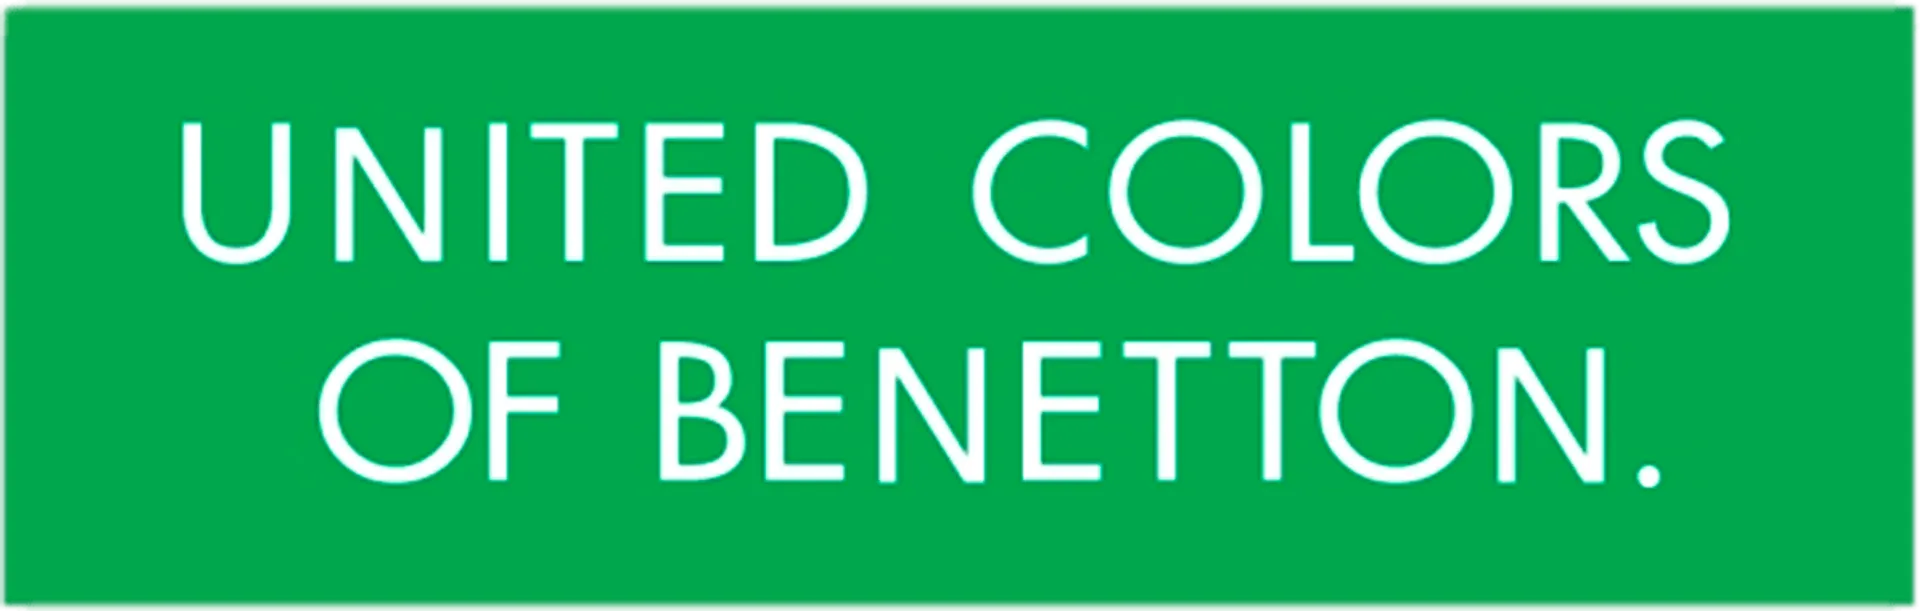 UNITED COLORS OF BENETTON logo. Current catalogue